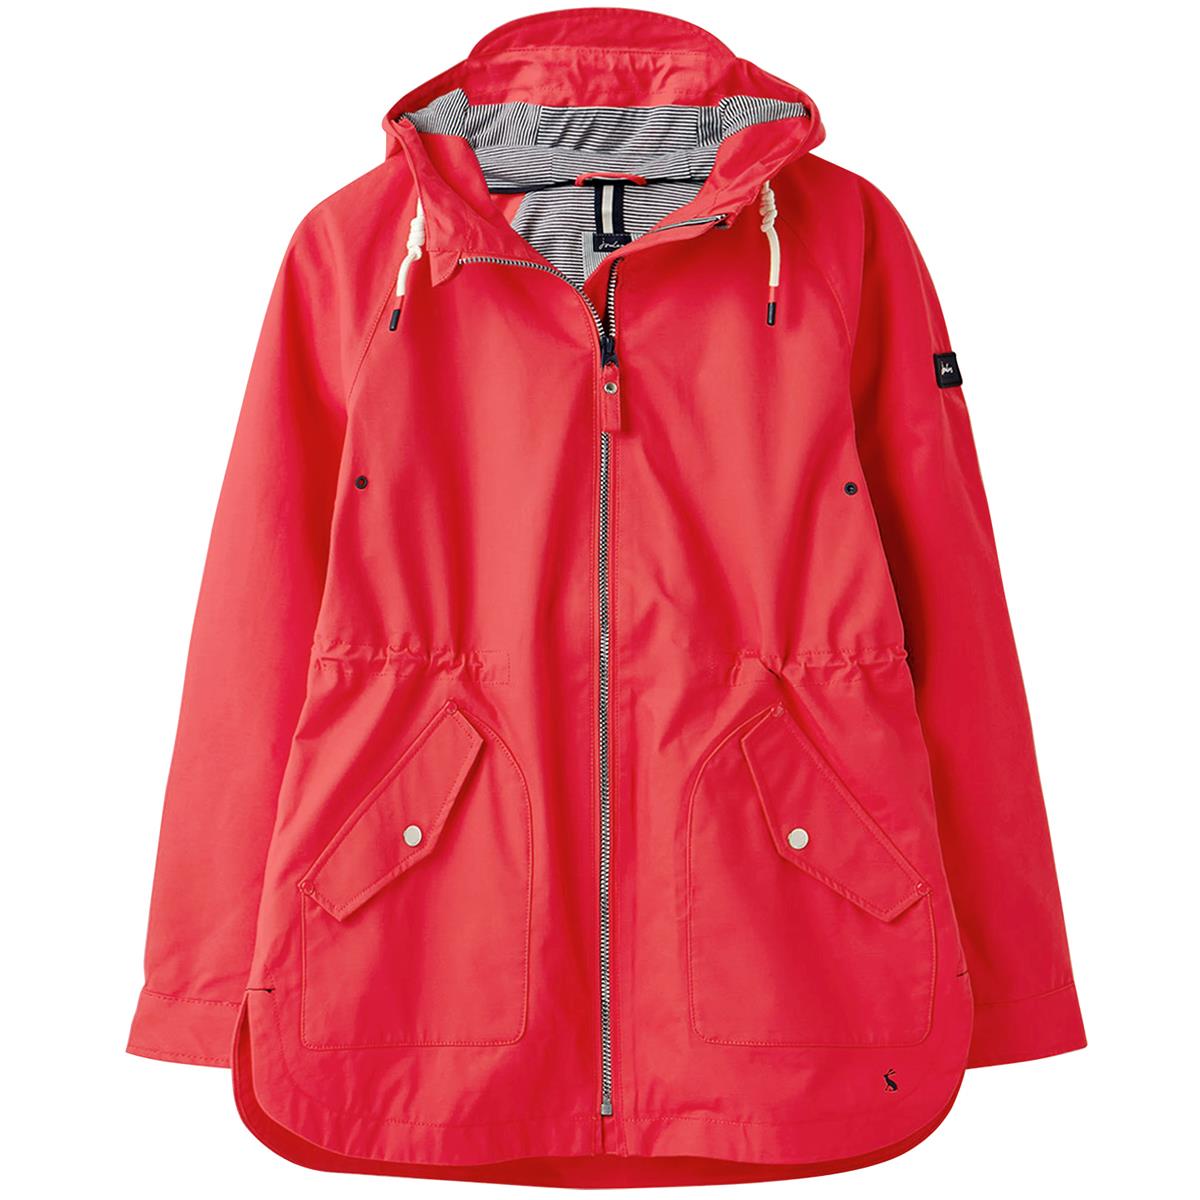 What are the reference codes for the Joules Shoreside Coastal Waterproof Jacket?